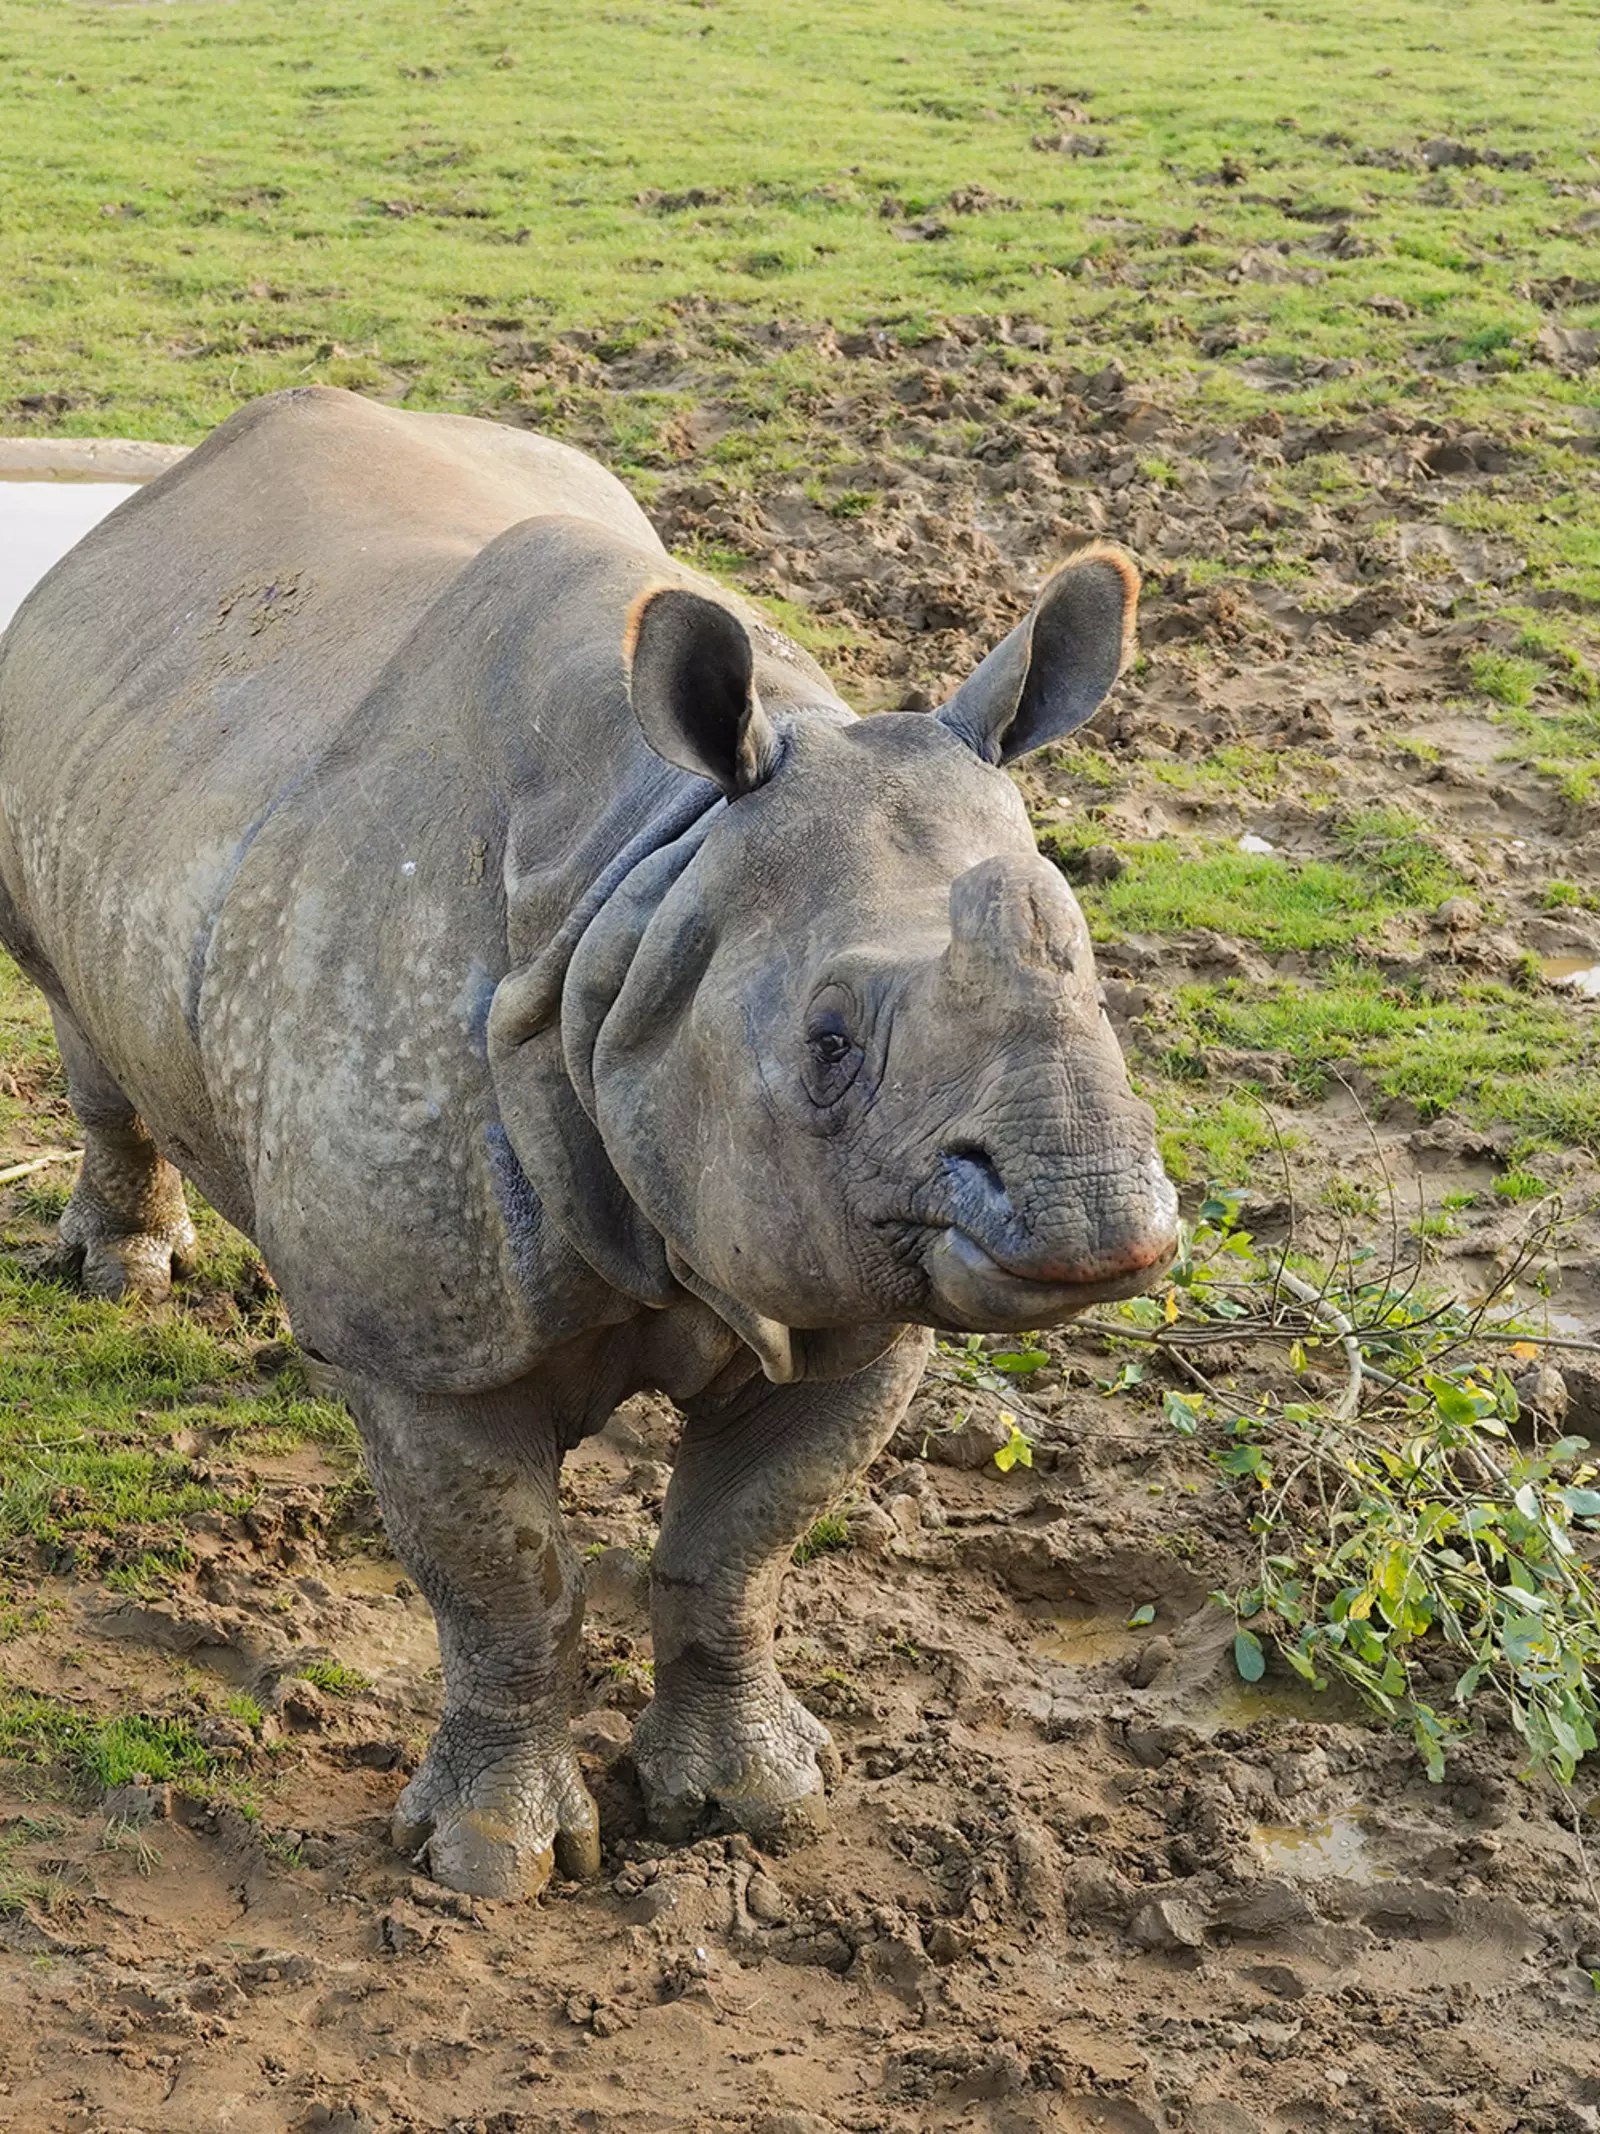 Greater one-horned rhino Beluki in the outdoor paddock